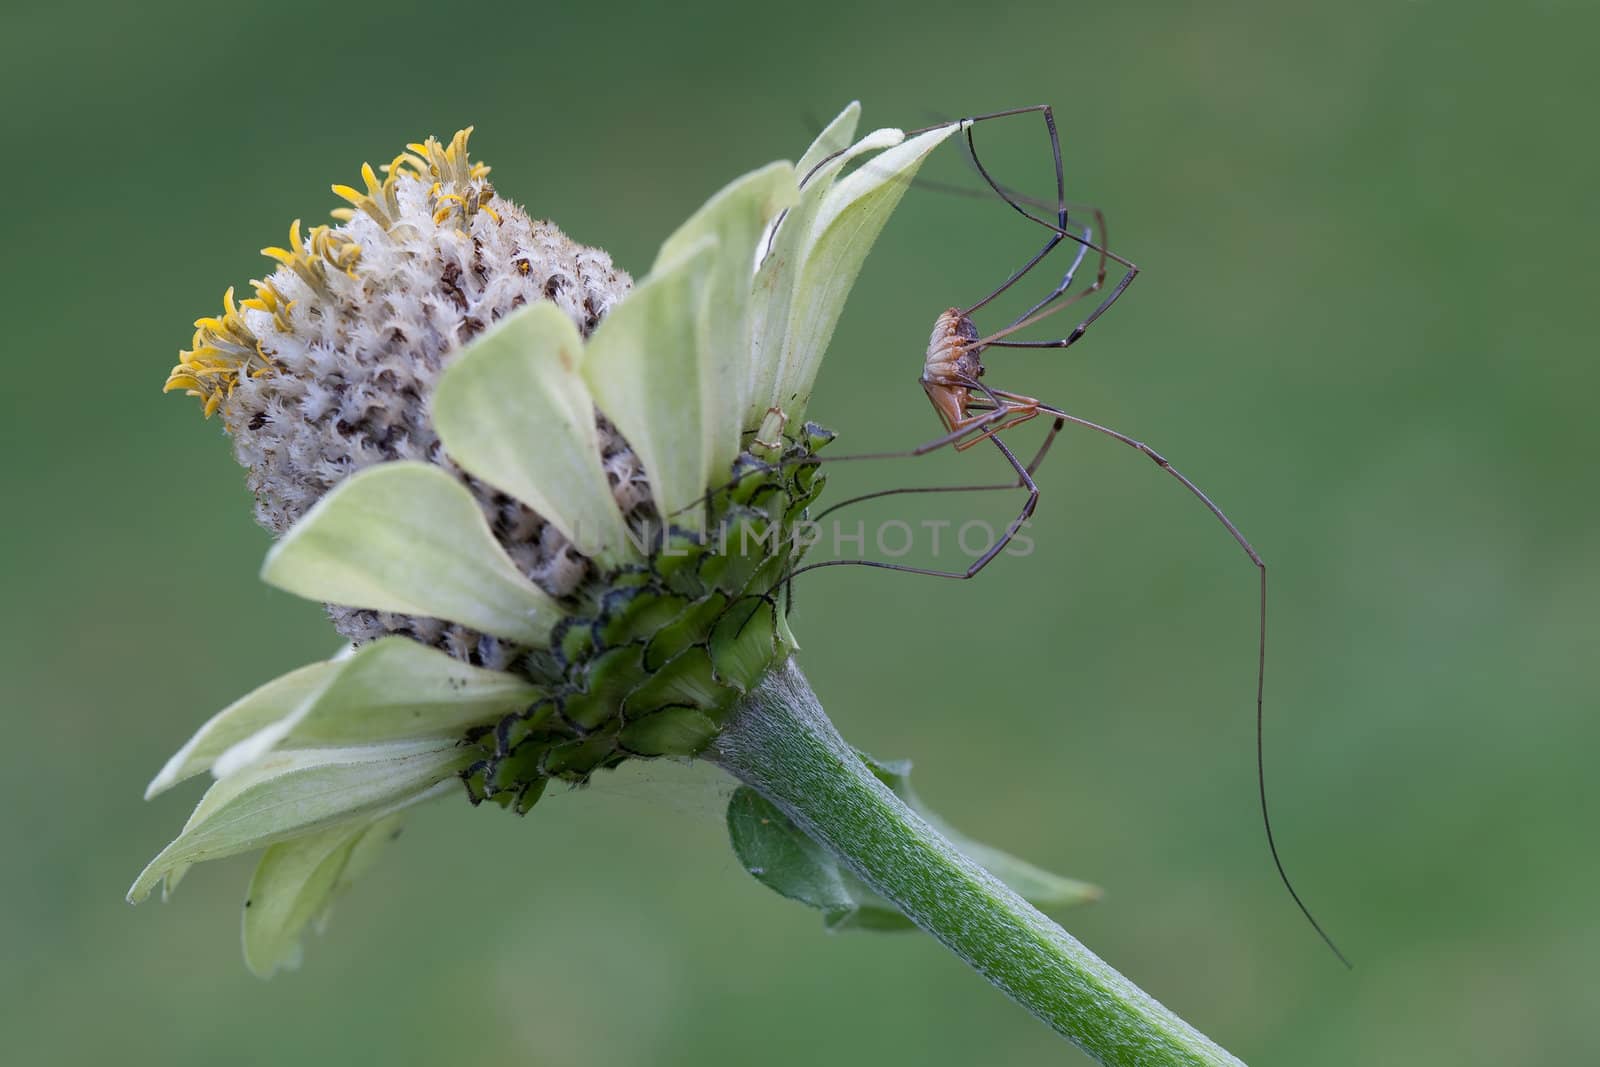 Long-legged spider on Echinacea flower in green background